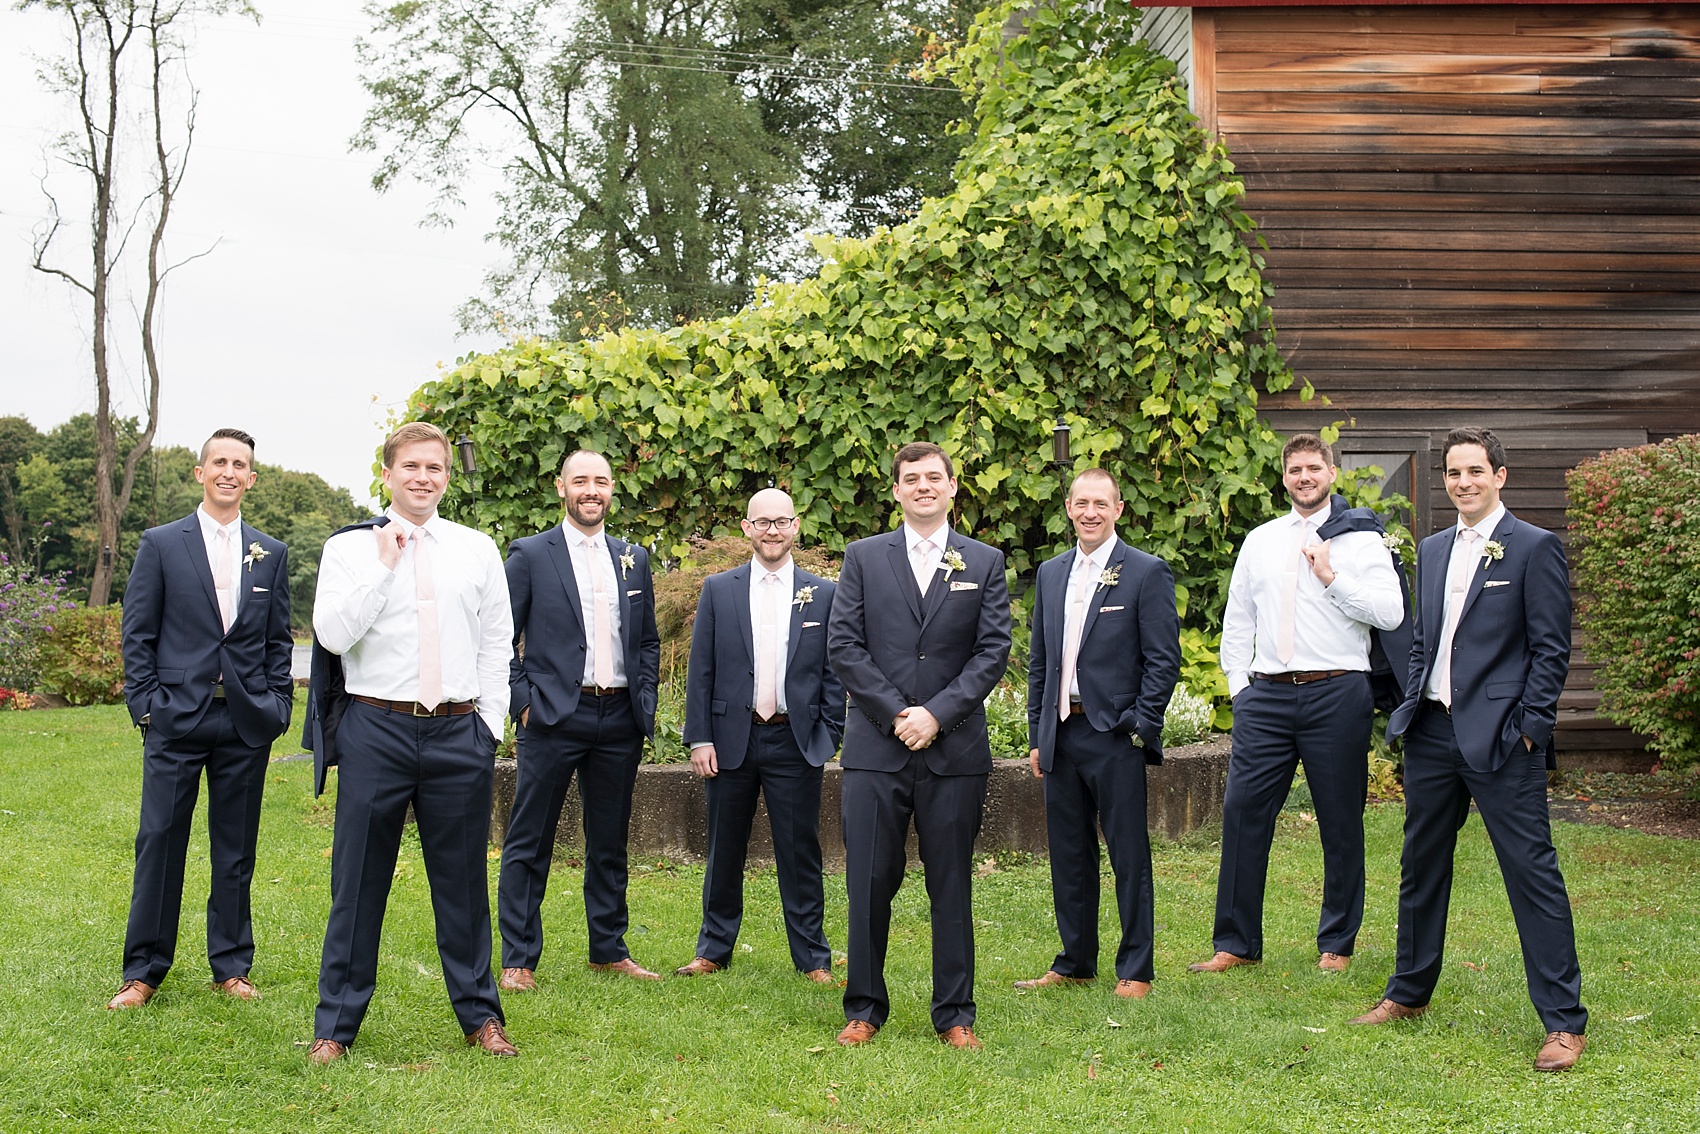 Red Maple Vineyard wedding. Photos by Mikkel Paige Photography. Groomsmen in navy suits and pink ties.